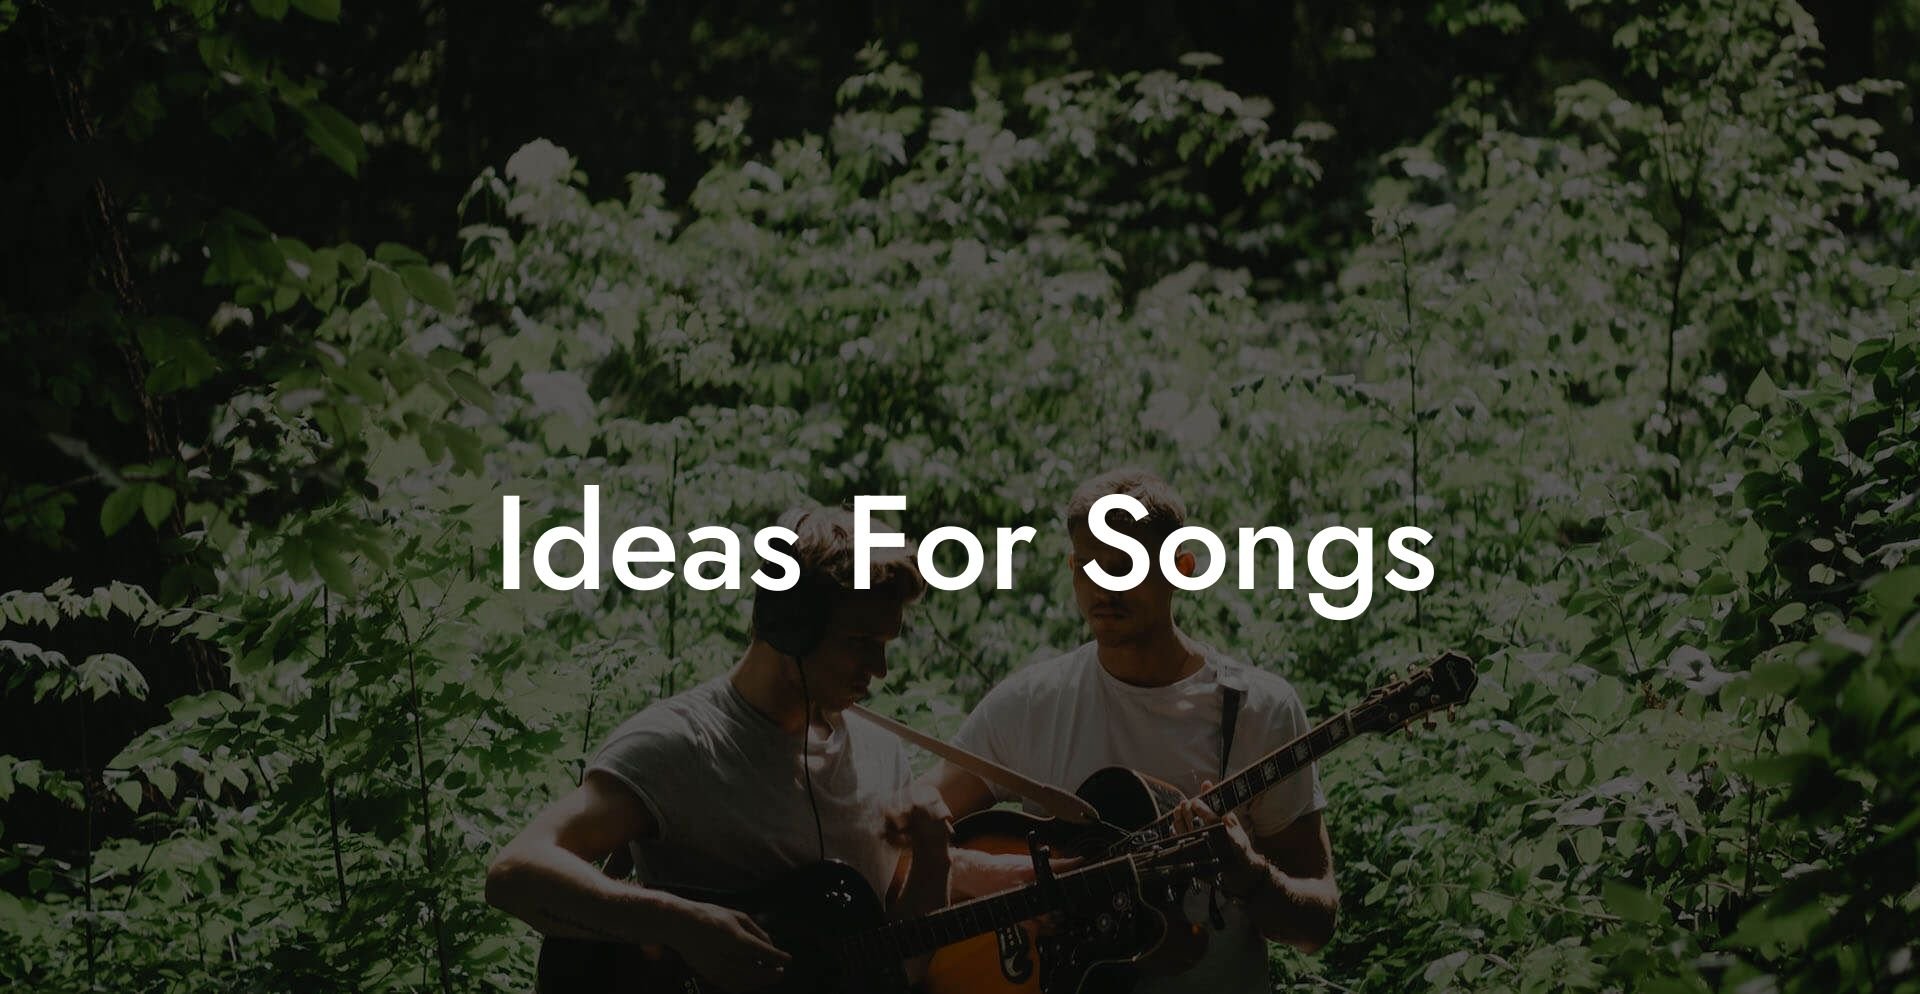 ideas for songs lyric assistant